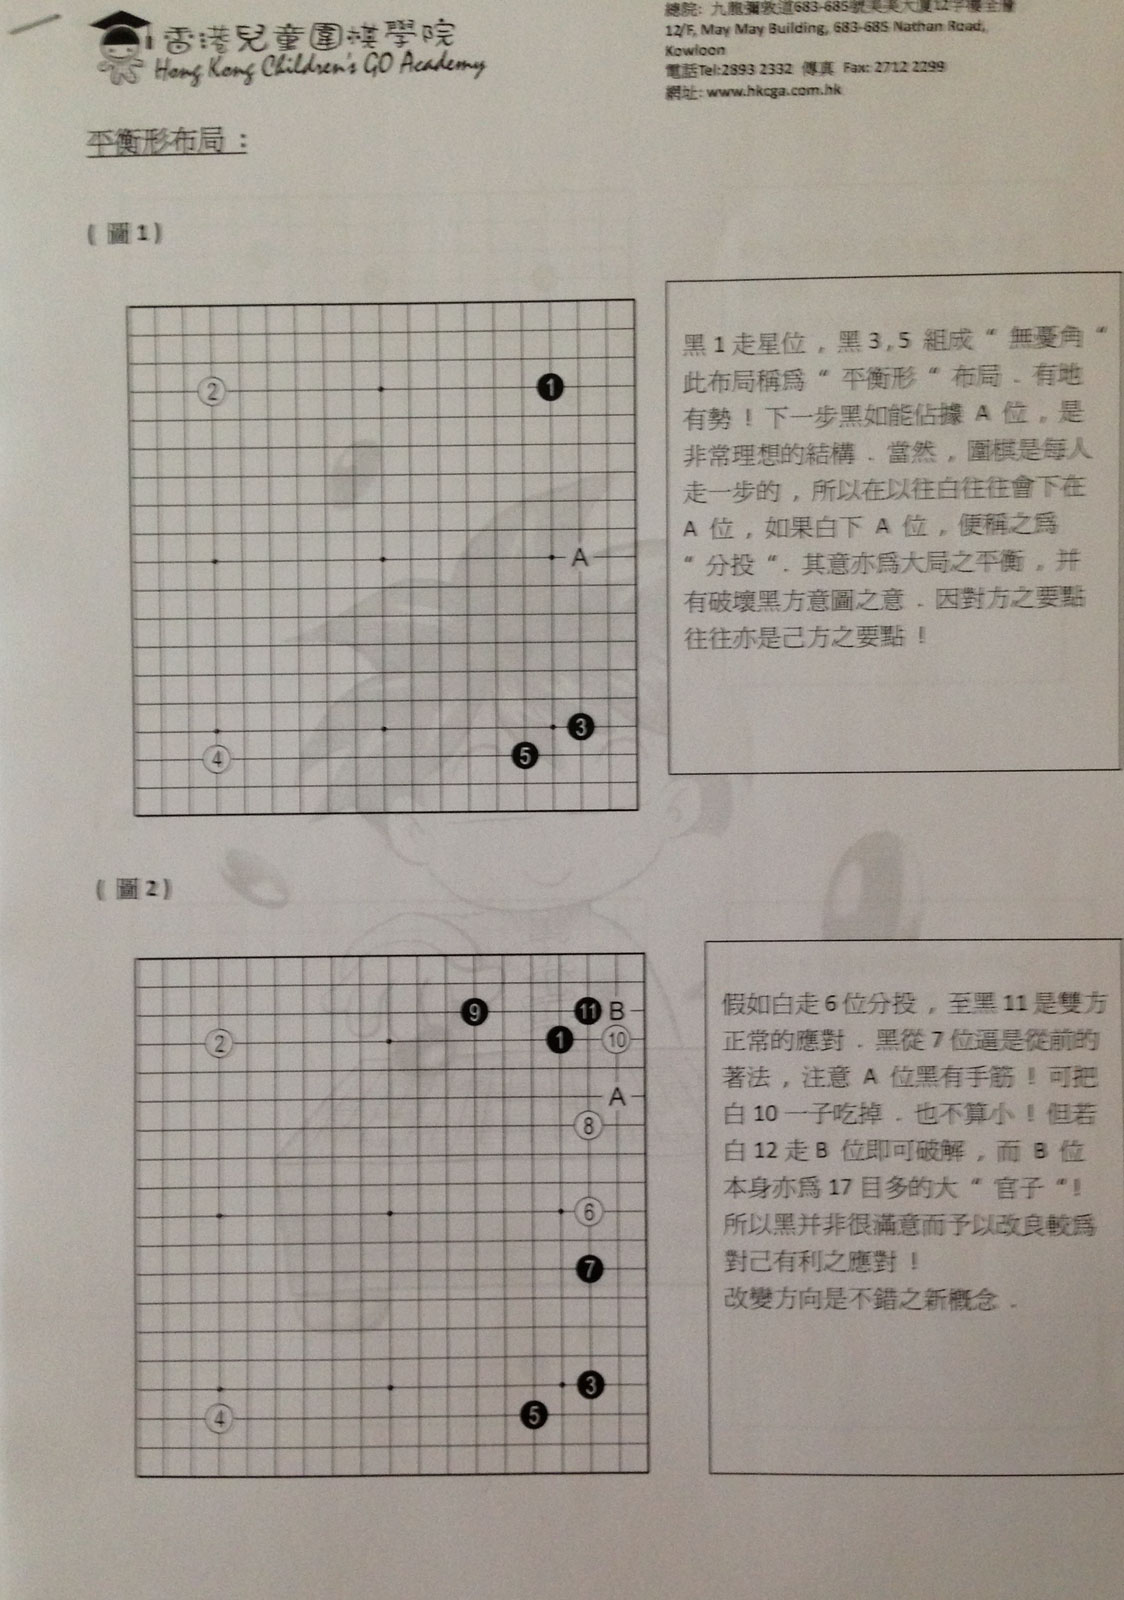 And a handout that Shiu Lao Shi created on the opening.